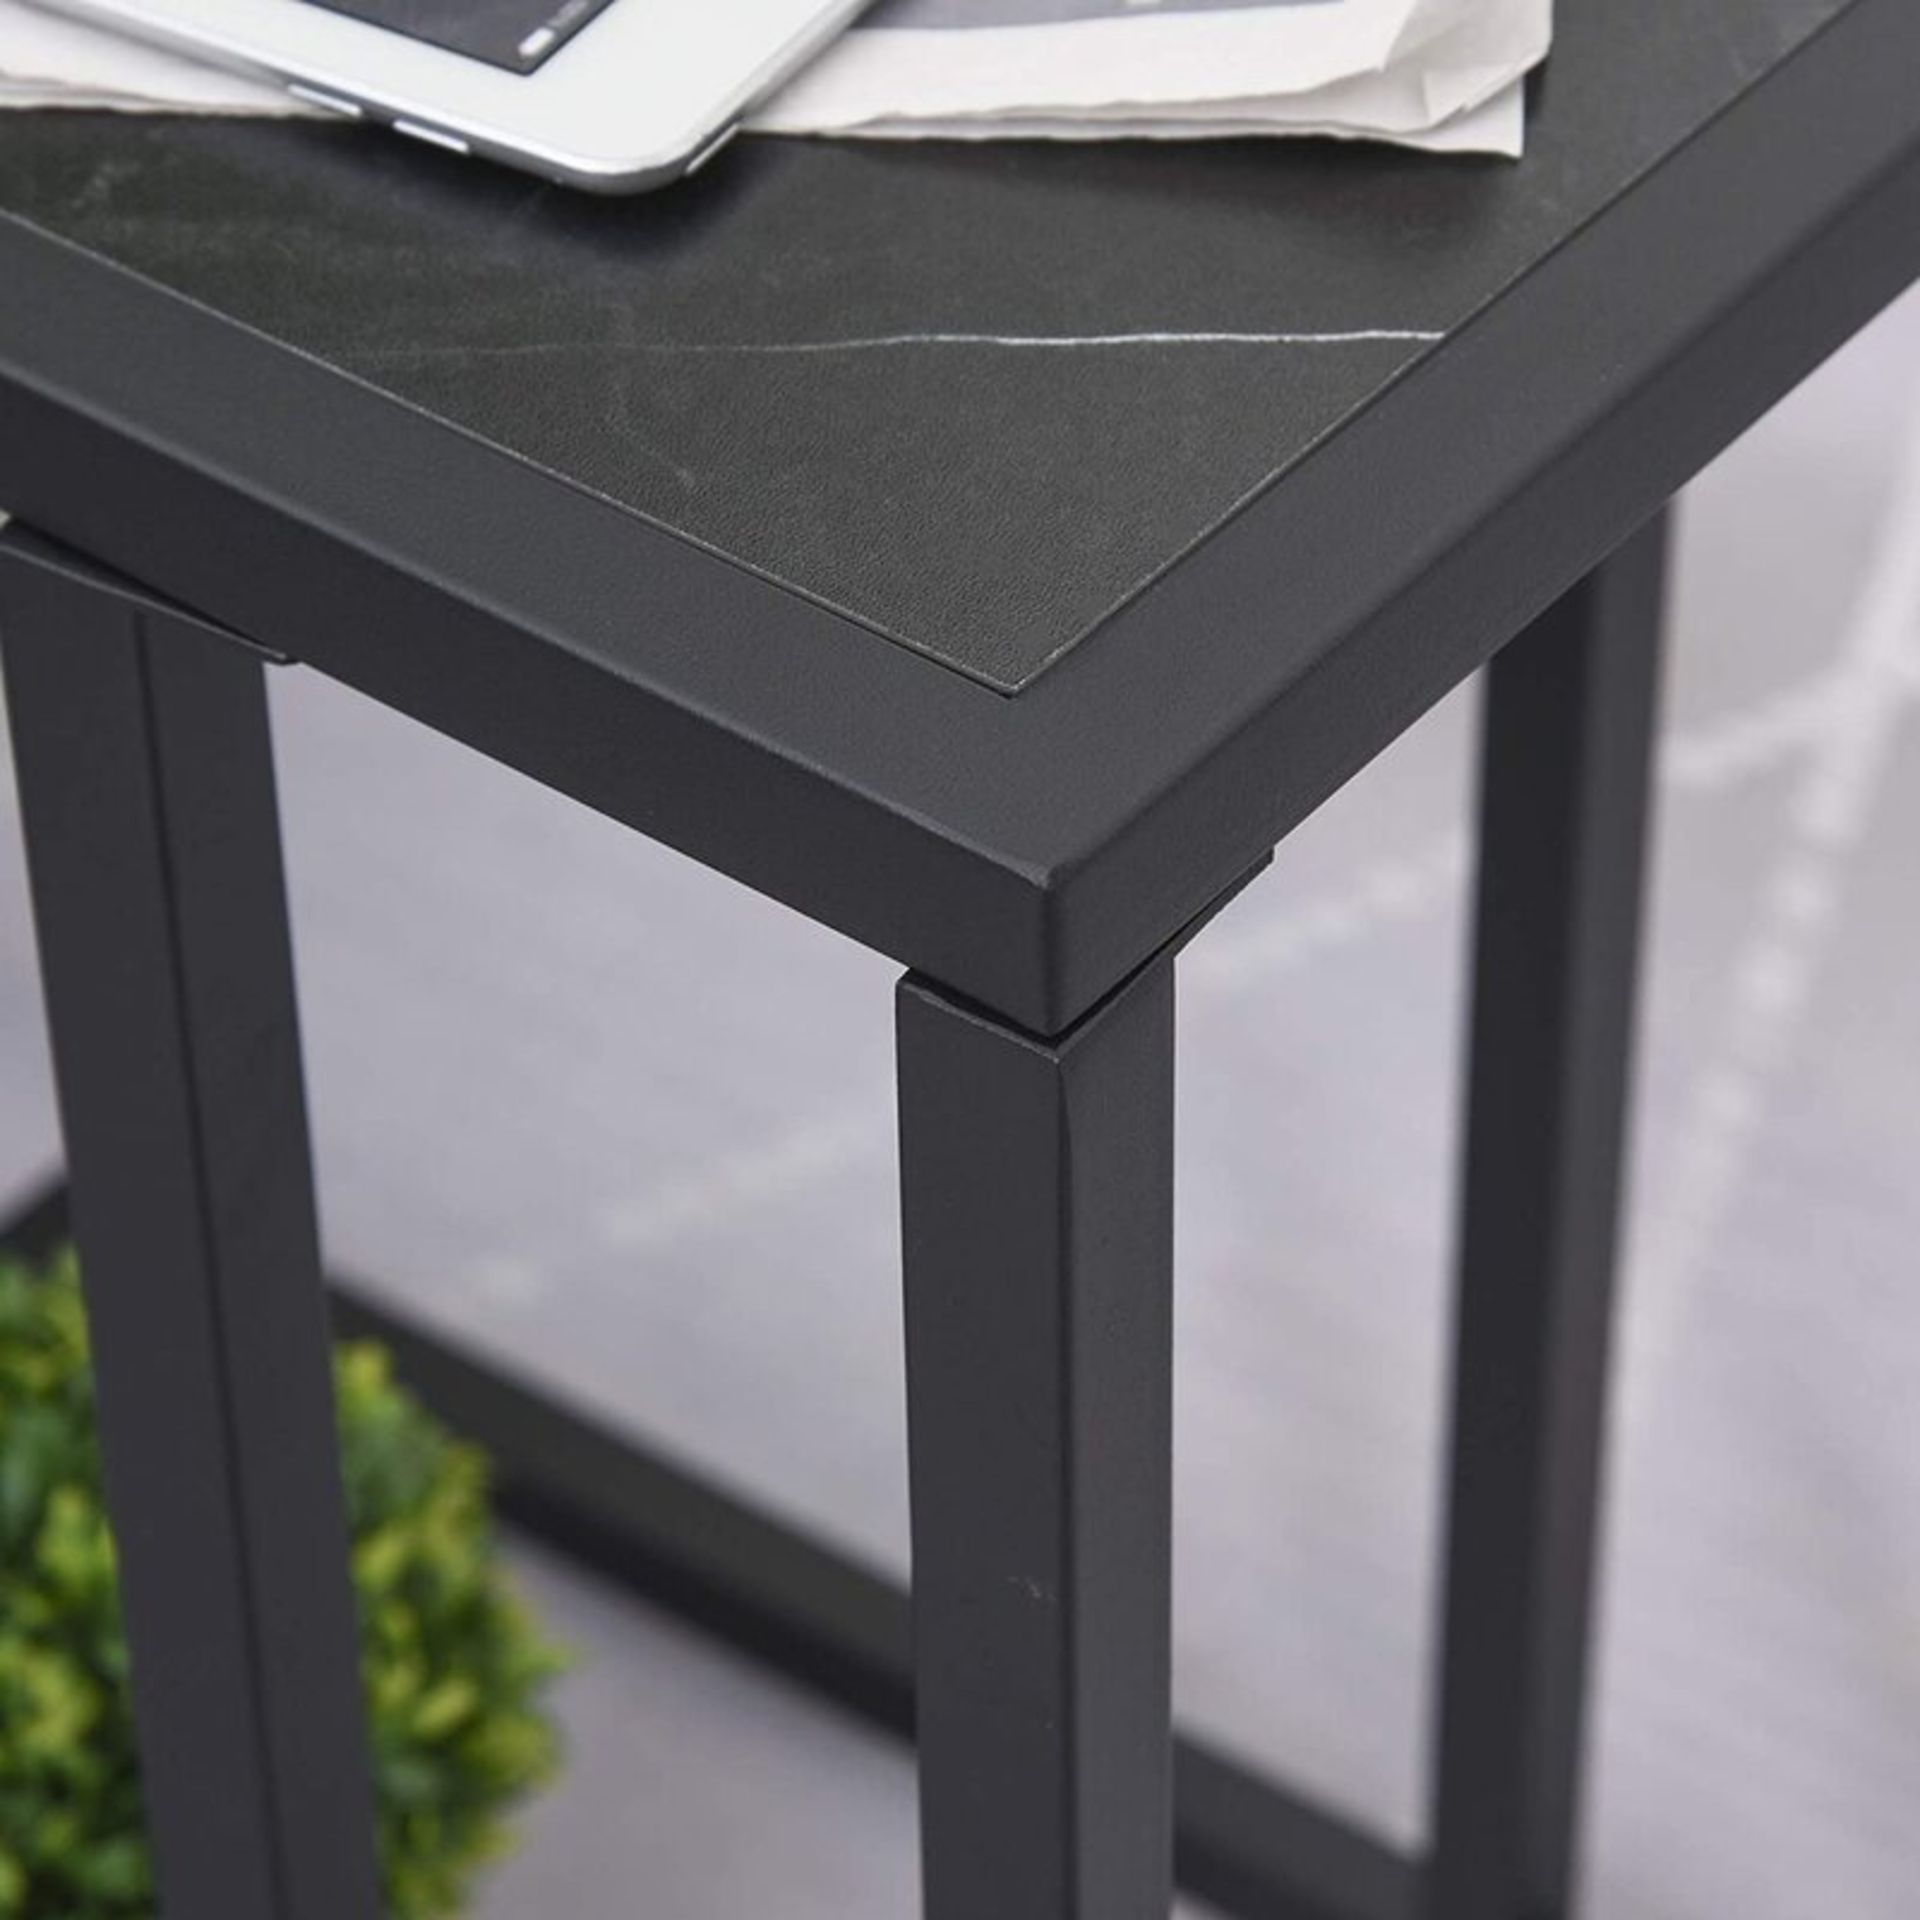 Mattitick Side Table - RRP £99.99 - Image 4 of 5